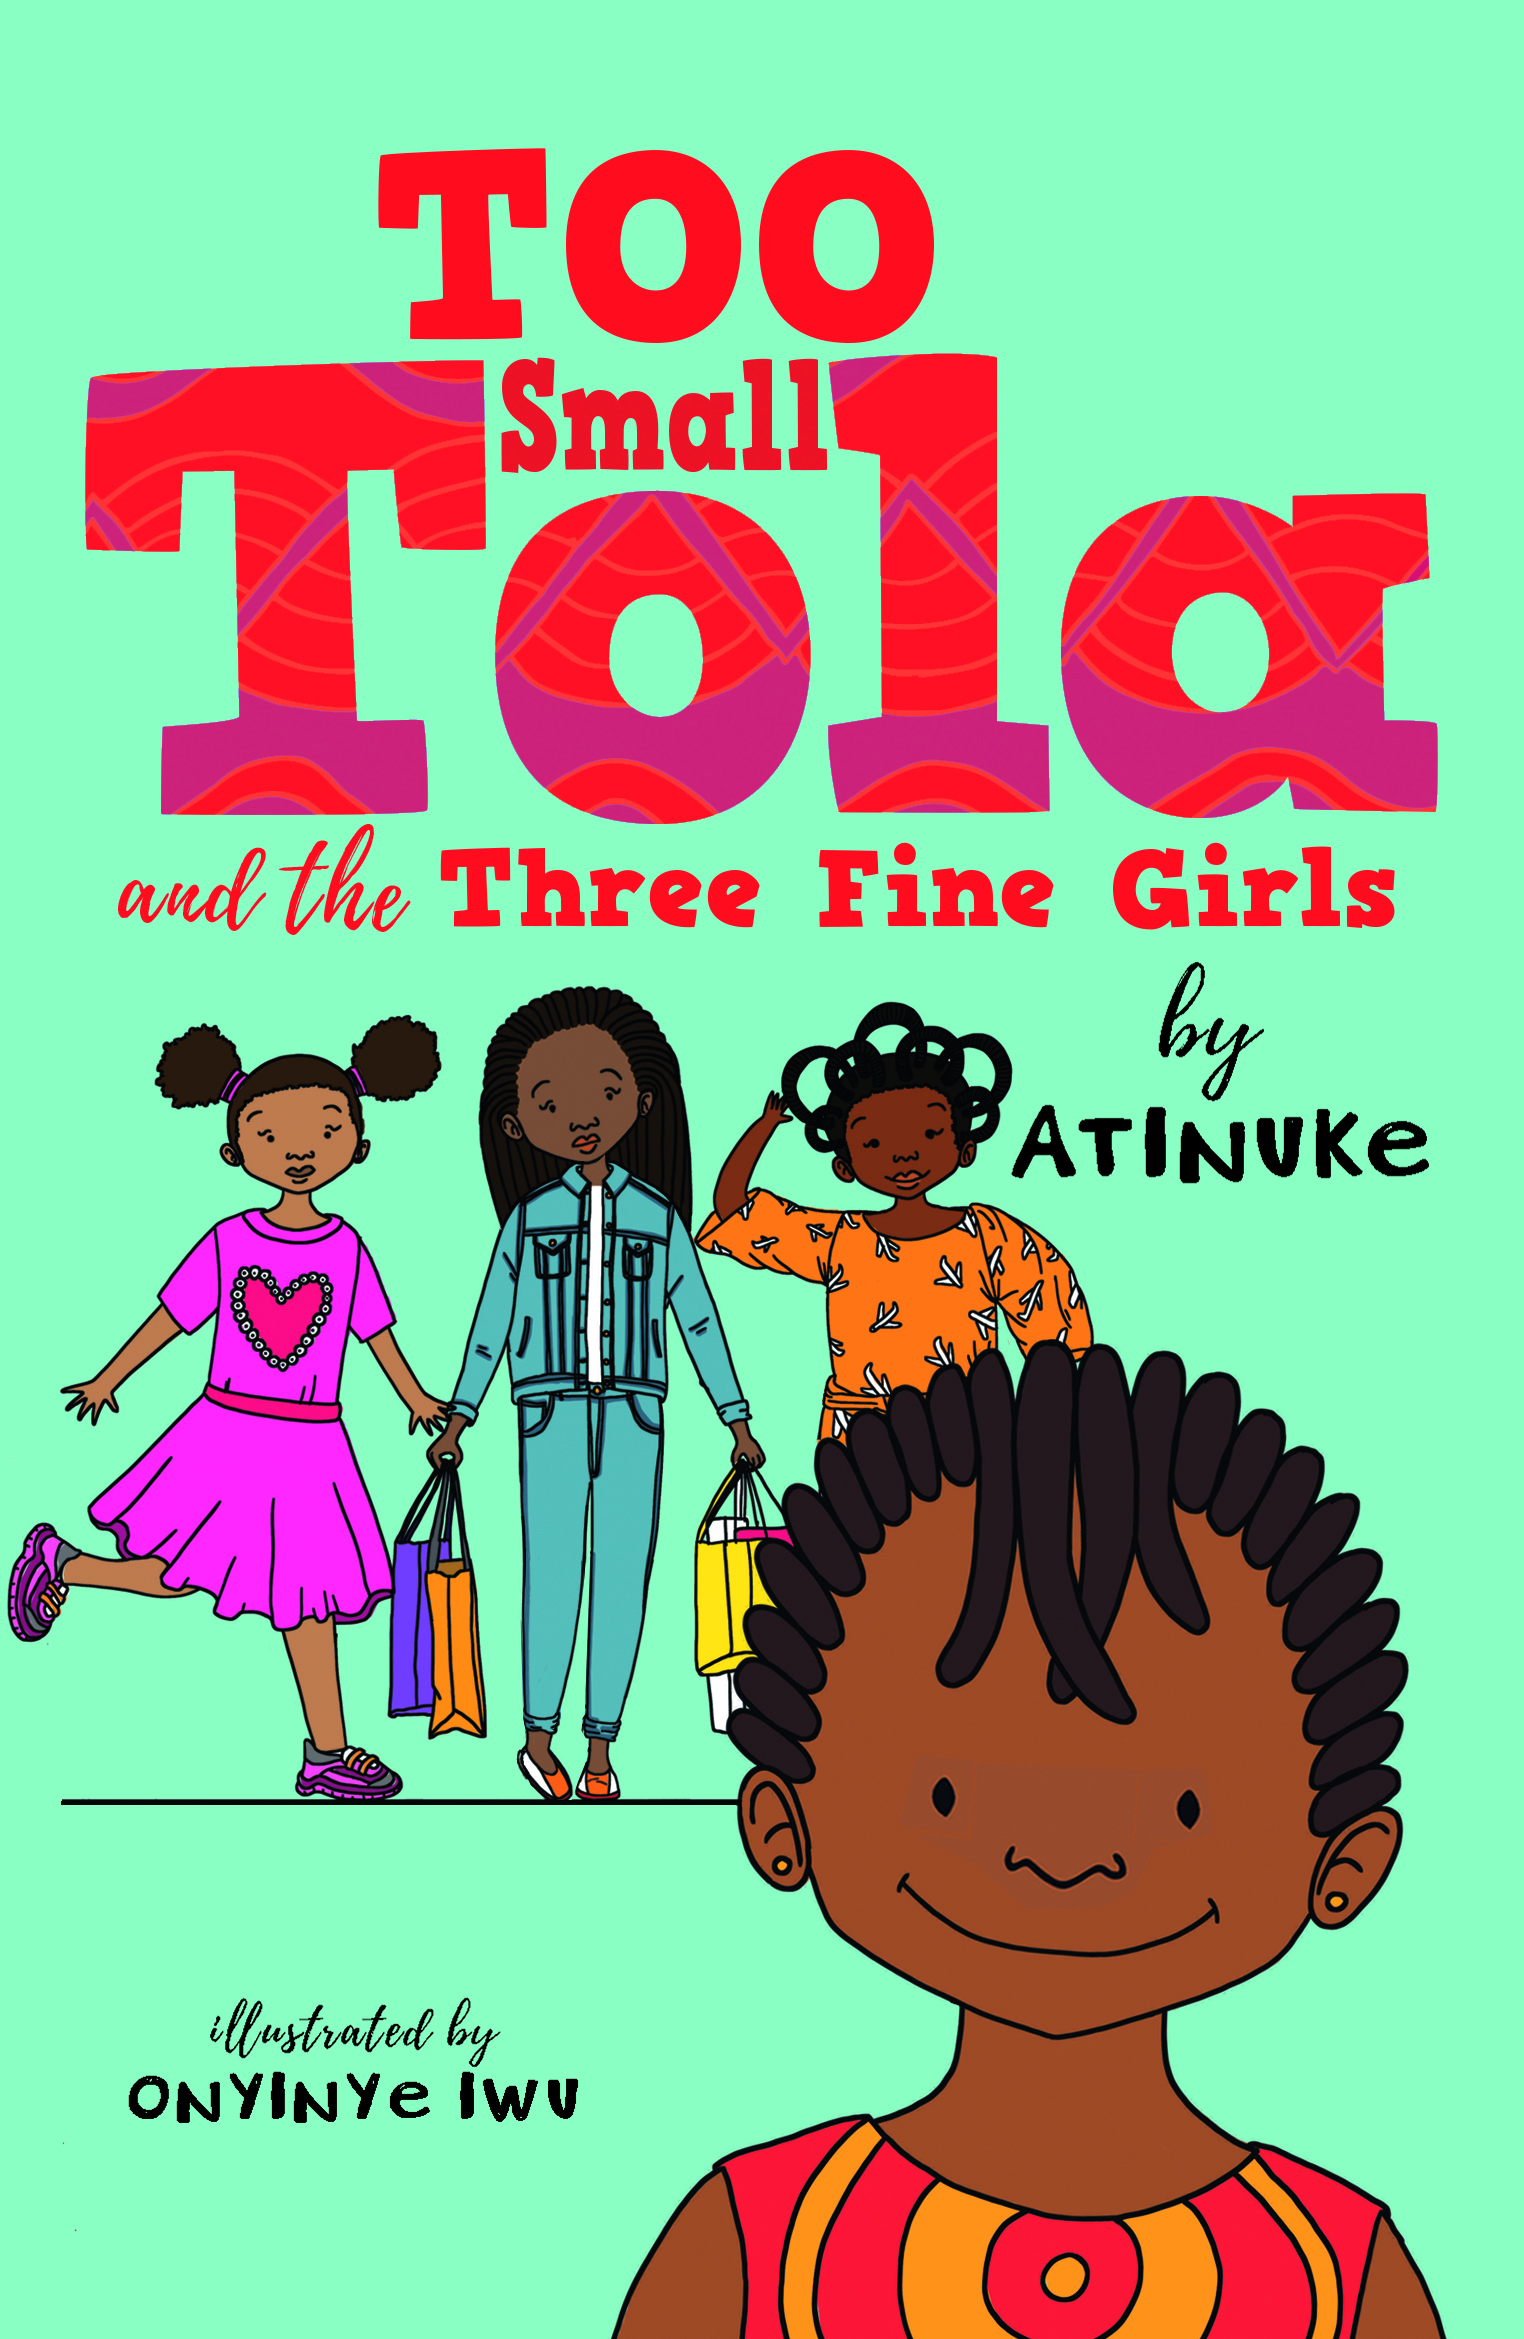 Too-Small-Tola-and-the-Three-Fine-Girls